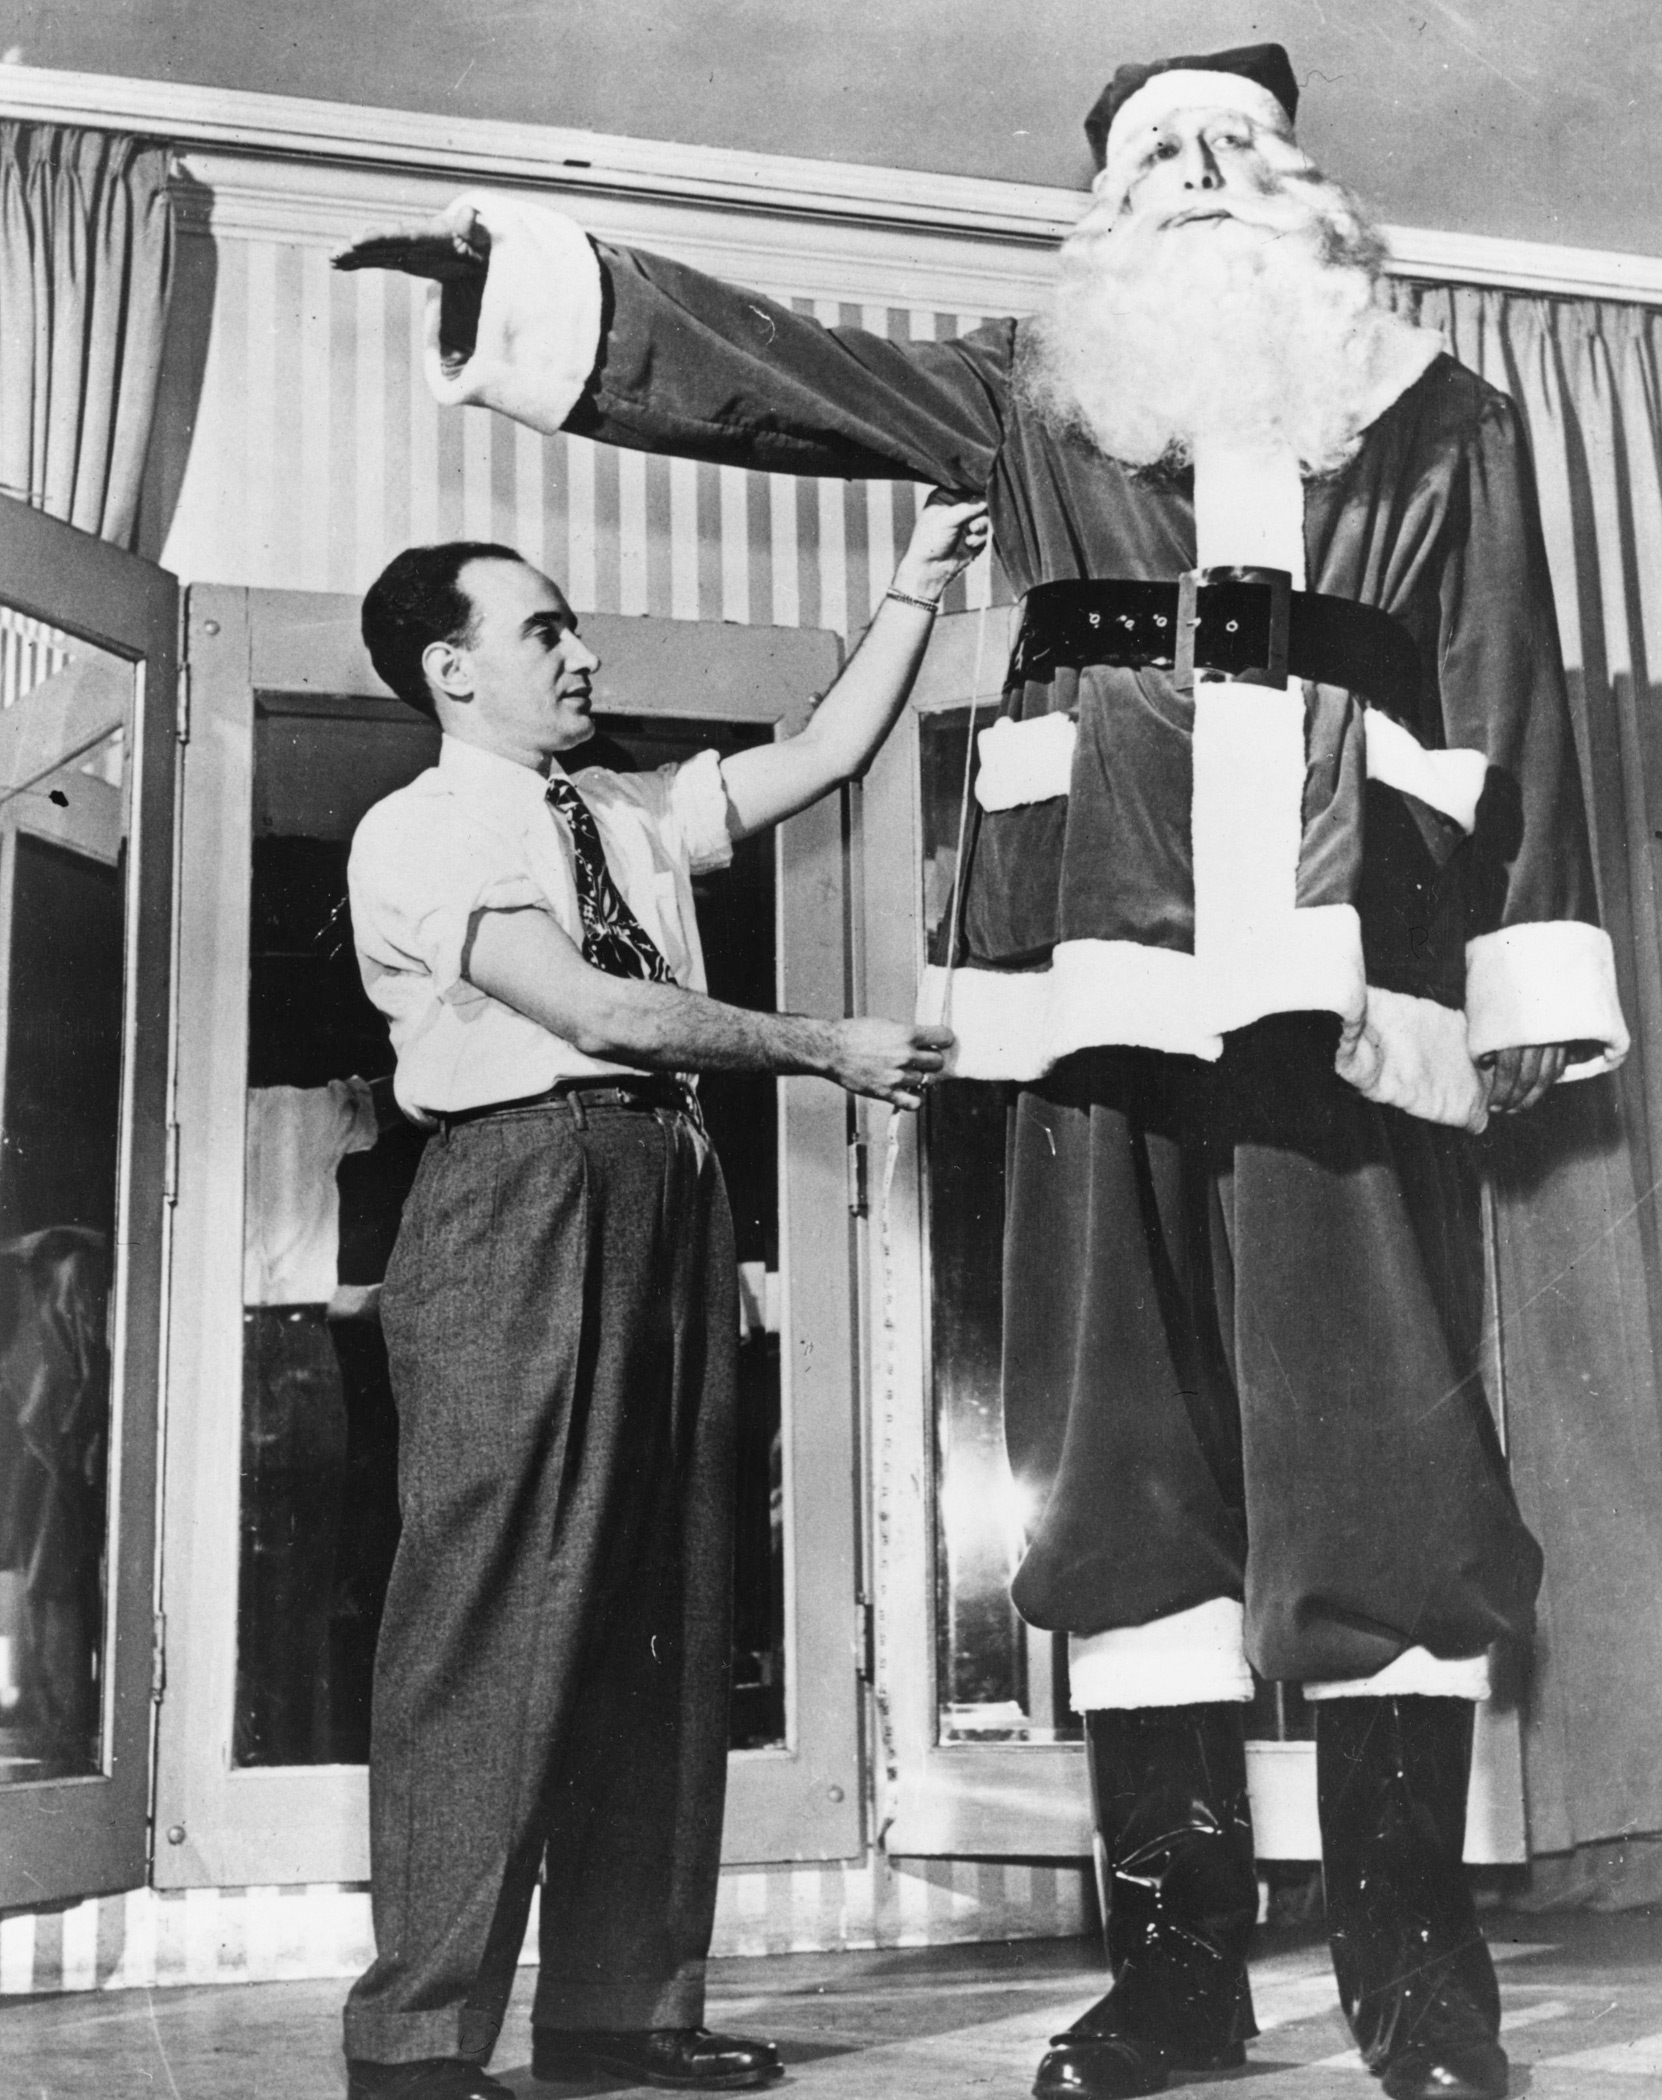 Claimed to be the biggest Santa Claus in the world, 7'8  Jacob Hudson Nacken is fitted for his costume by a tailor on arrival in New York from Germany.  December 1949.